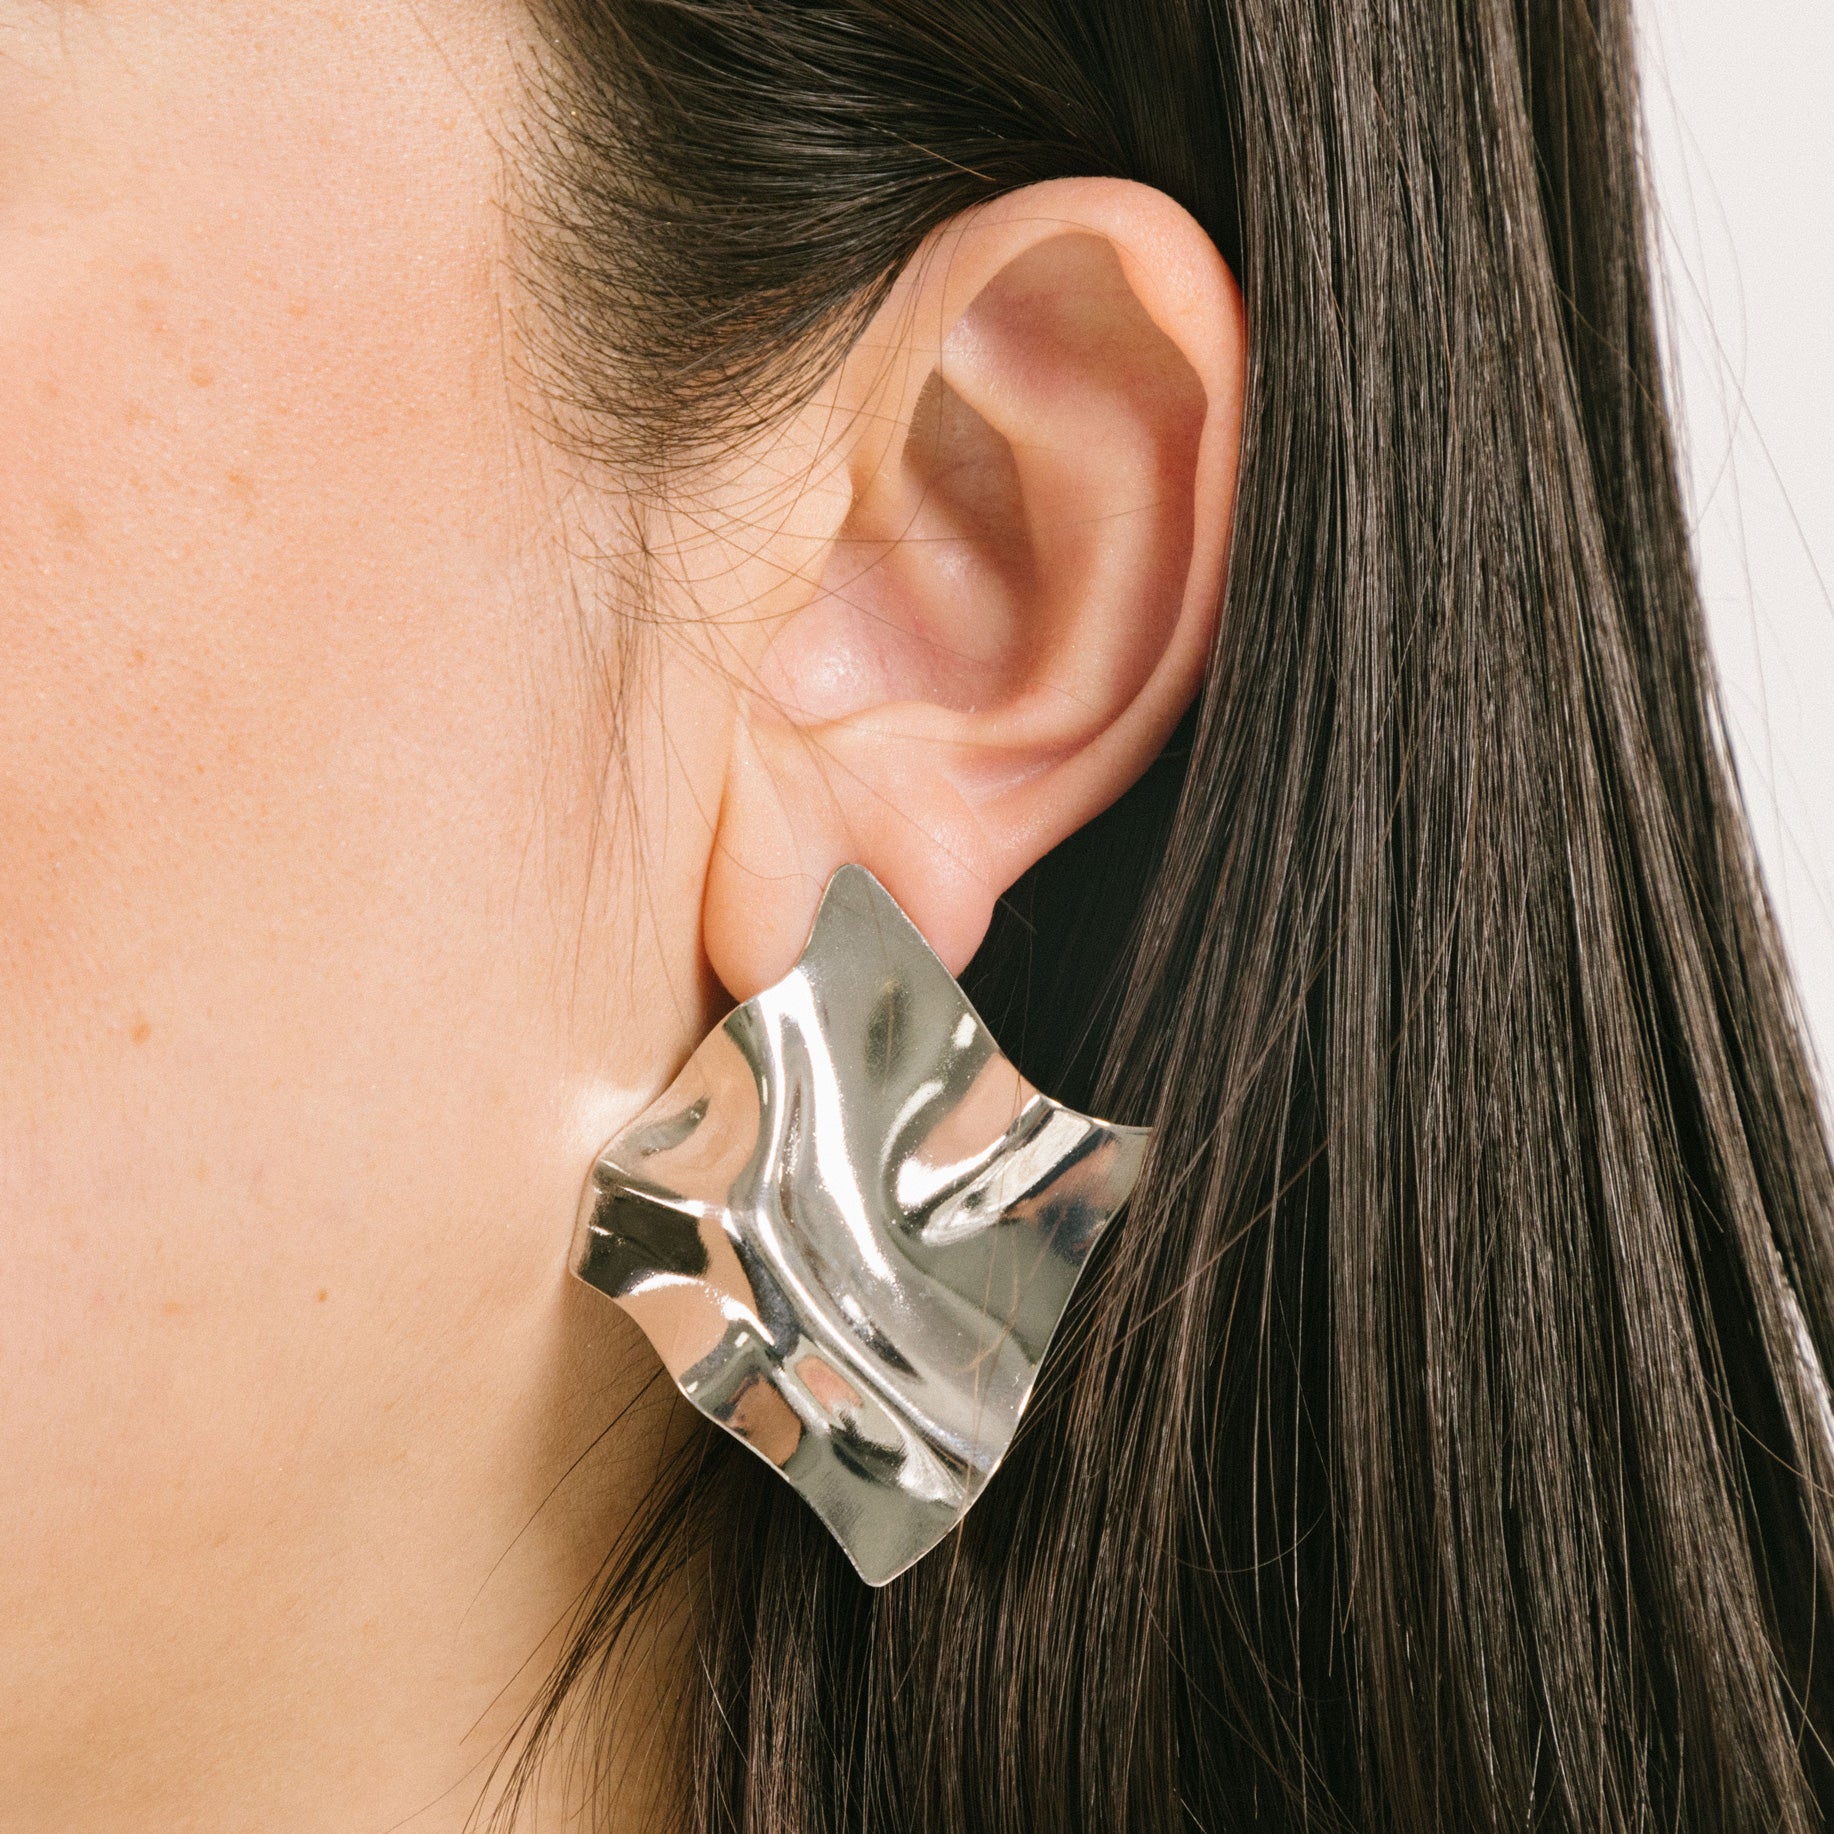 A model wearing the Silver Crinkle Clip On Earrings are designed for all ear types, including those with thick/large, sensitive, small/thin, or stretched/healing ears. This item includes one pair of clip on earrings crafted from silver tone copper alloy. A removable rubber padding ensures secure and comfortable closure.